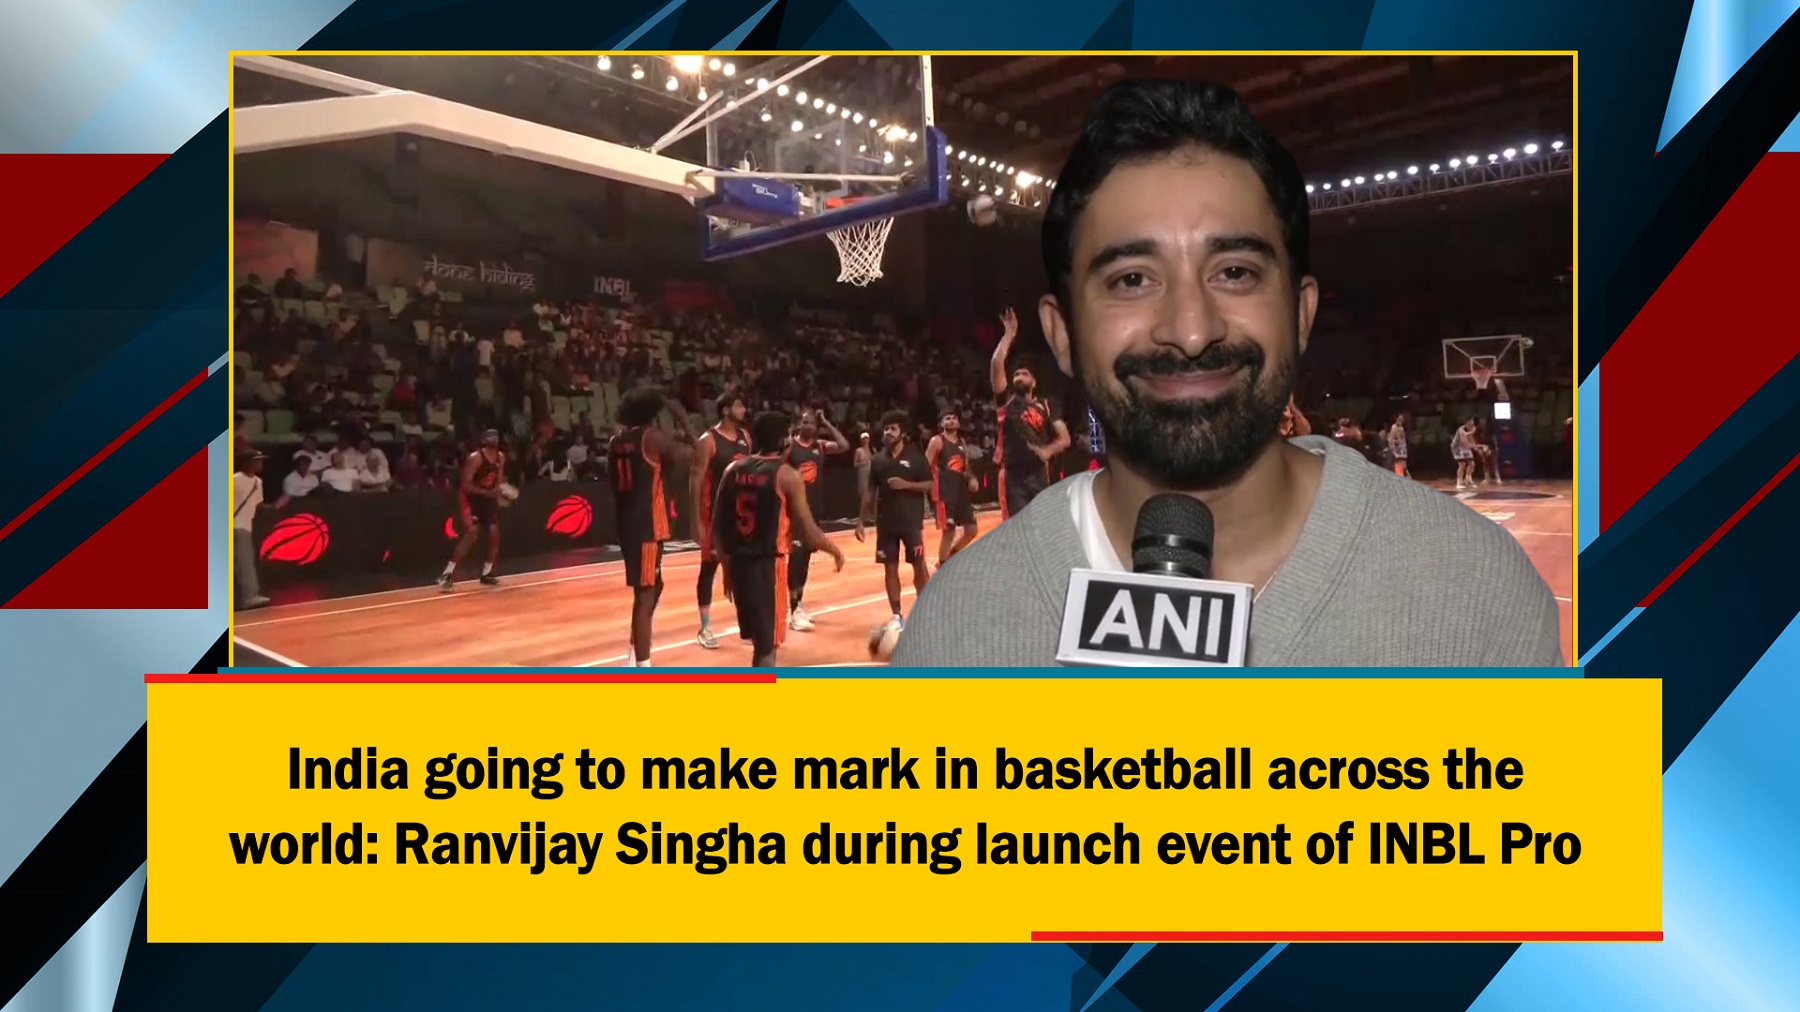 India going to make mark in basketball across the world: Ranvijay Singha during launch event of INBL Pro